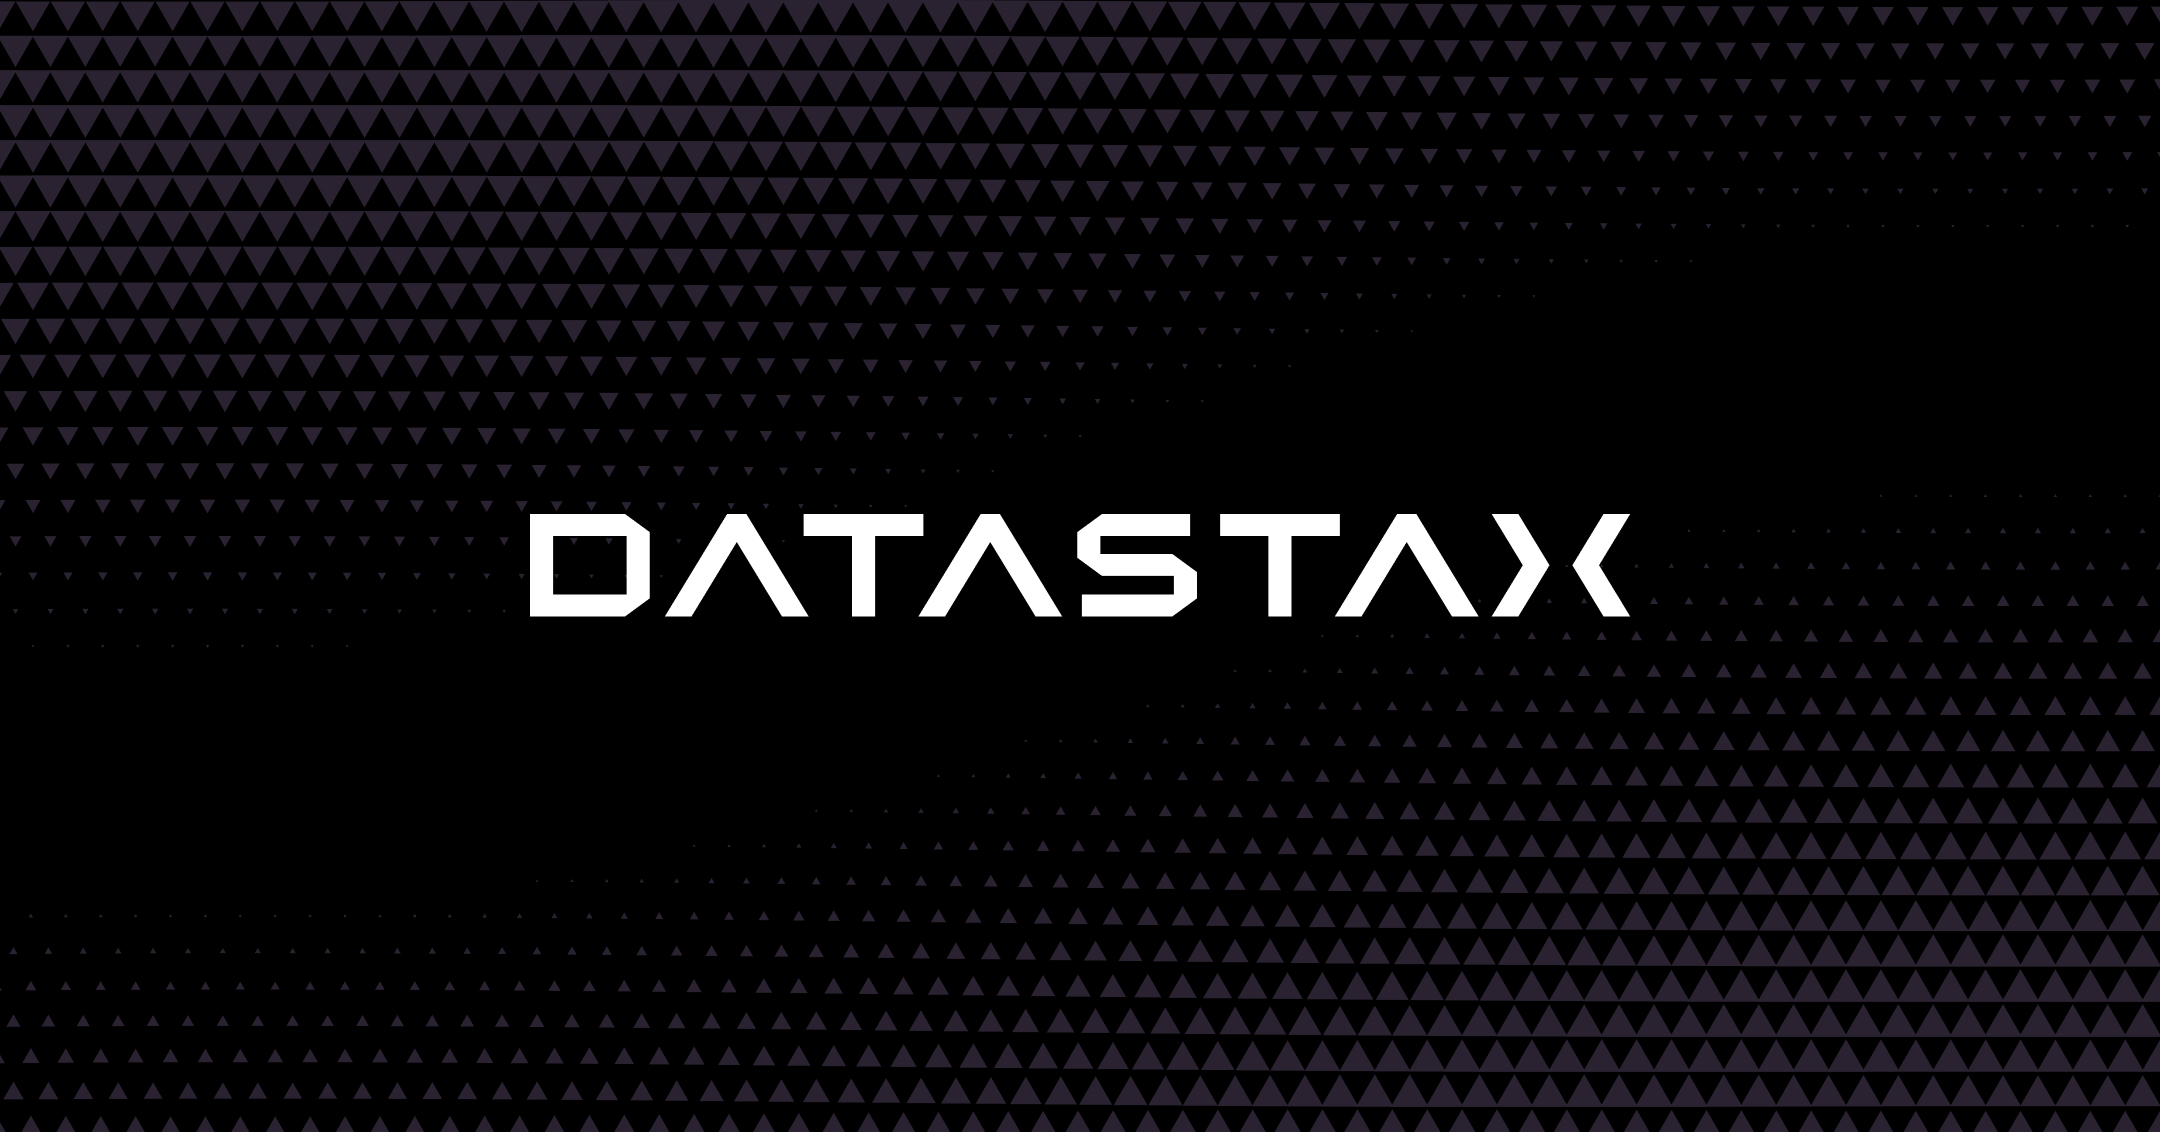 Circle Scales Up Digital Parenting Services with DataStax Astra DB